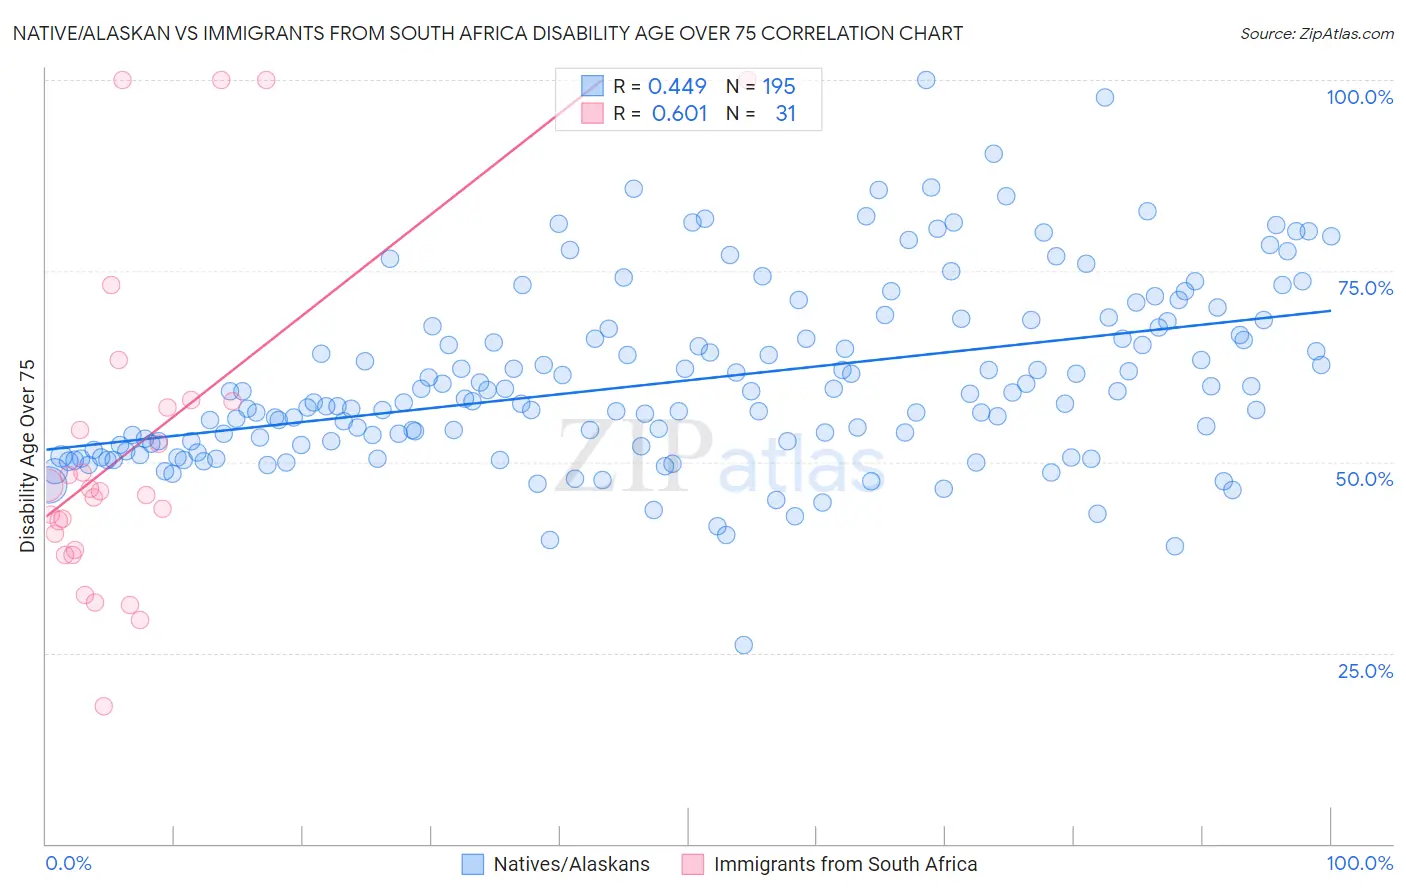 Native/Alaskan vs Immigrants from South Africa Disability Age Over 75